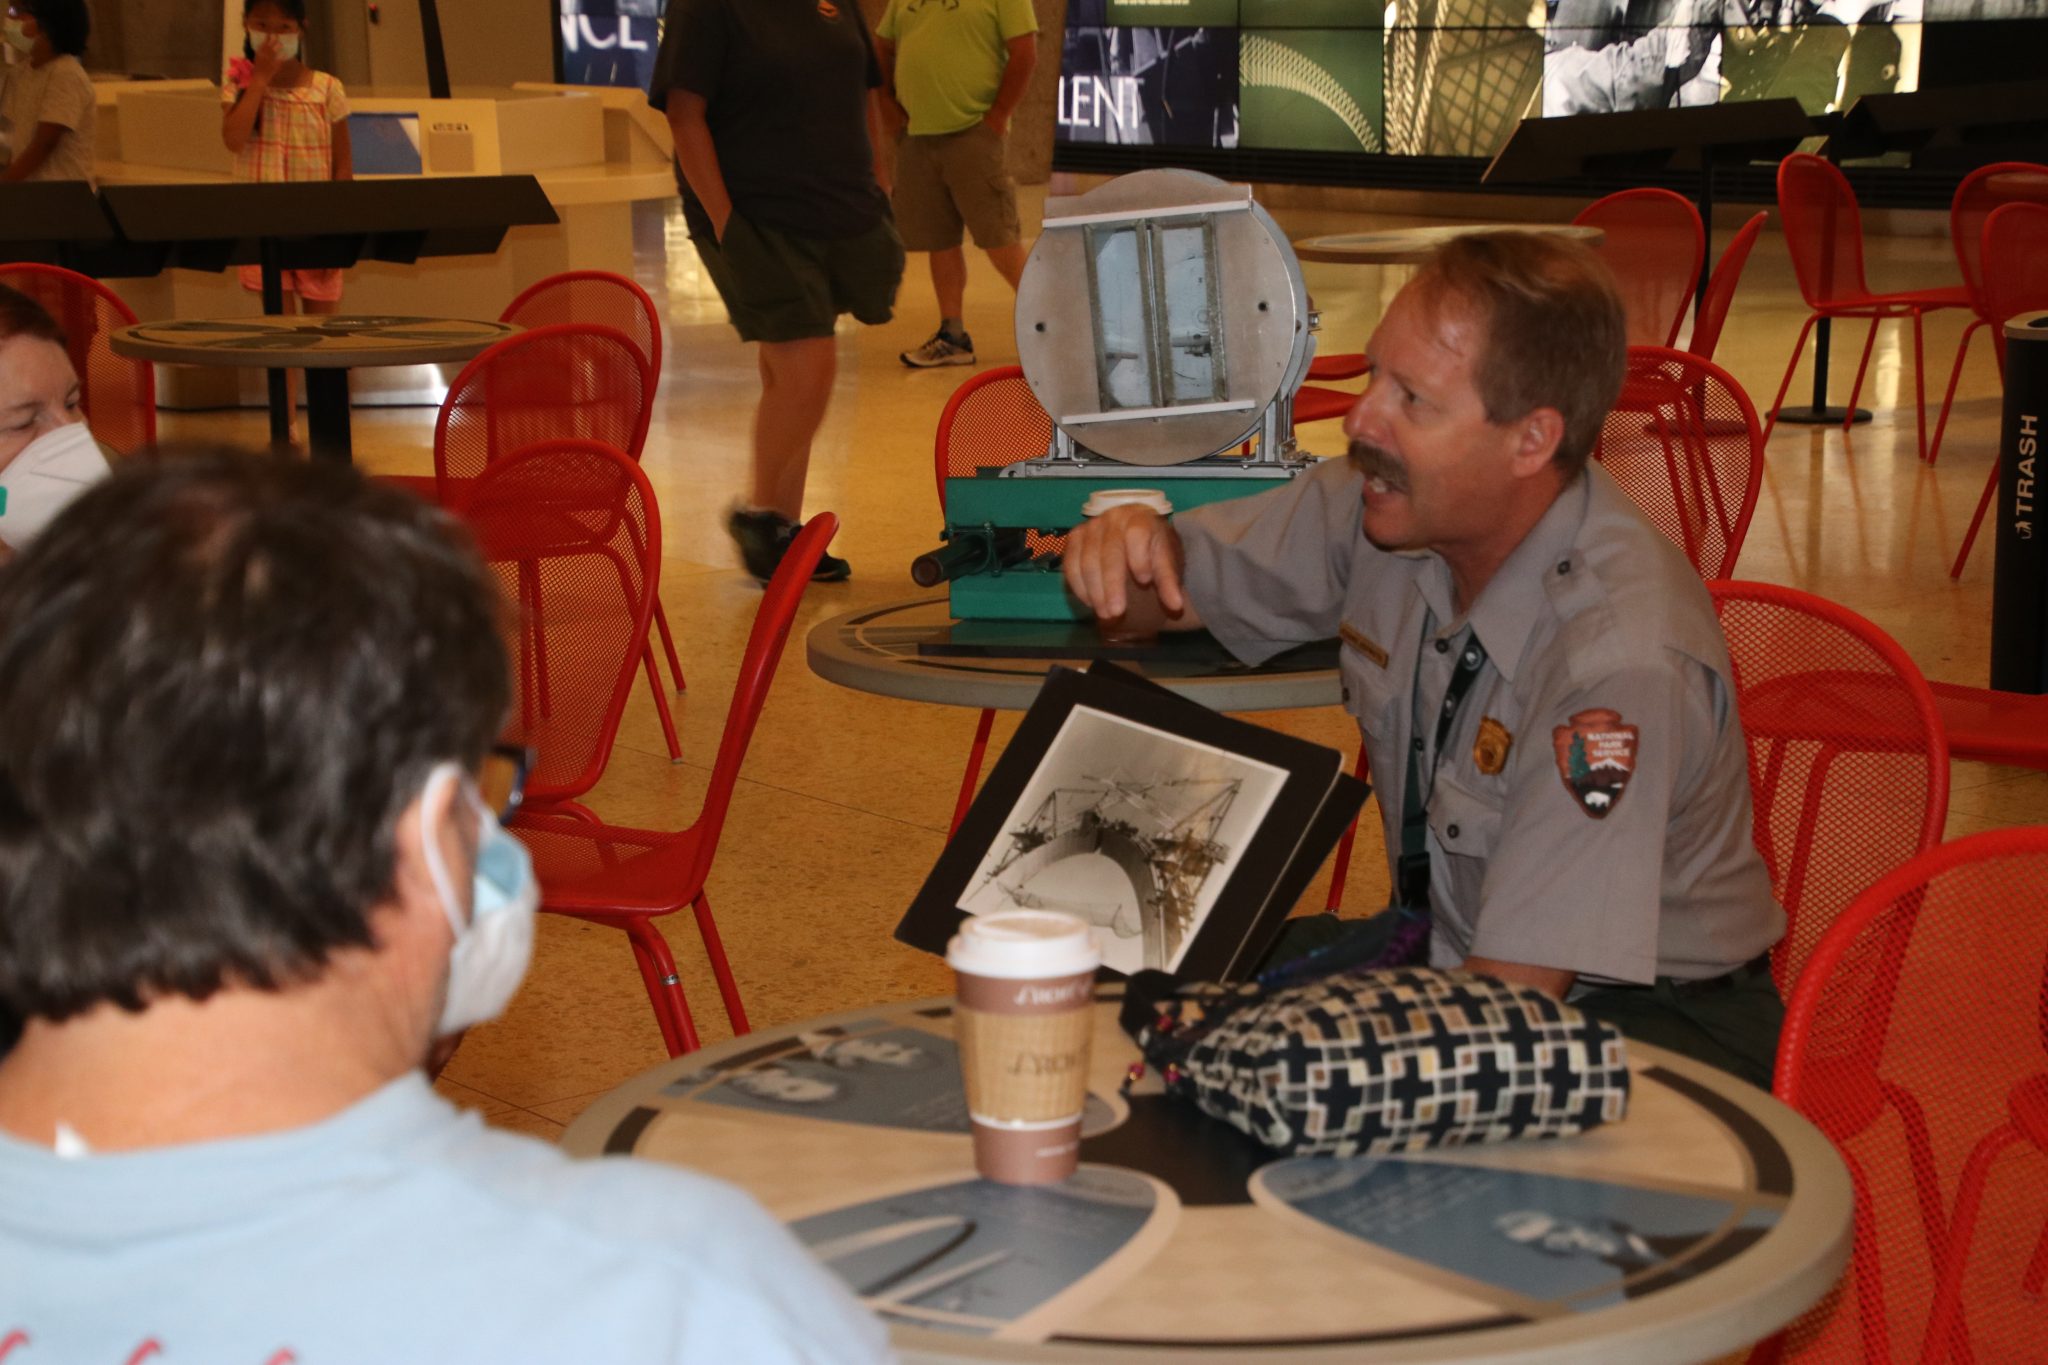 A National Park Service Ranger holds a photo of the construction of the Gateway Arch and speaks to guests during a Coffee with a Ranger event at Gateway Arch National Park. (Photo provided by NPS)